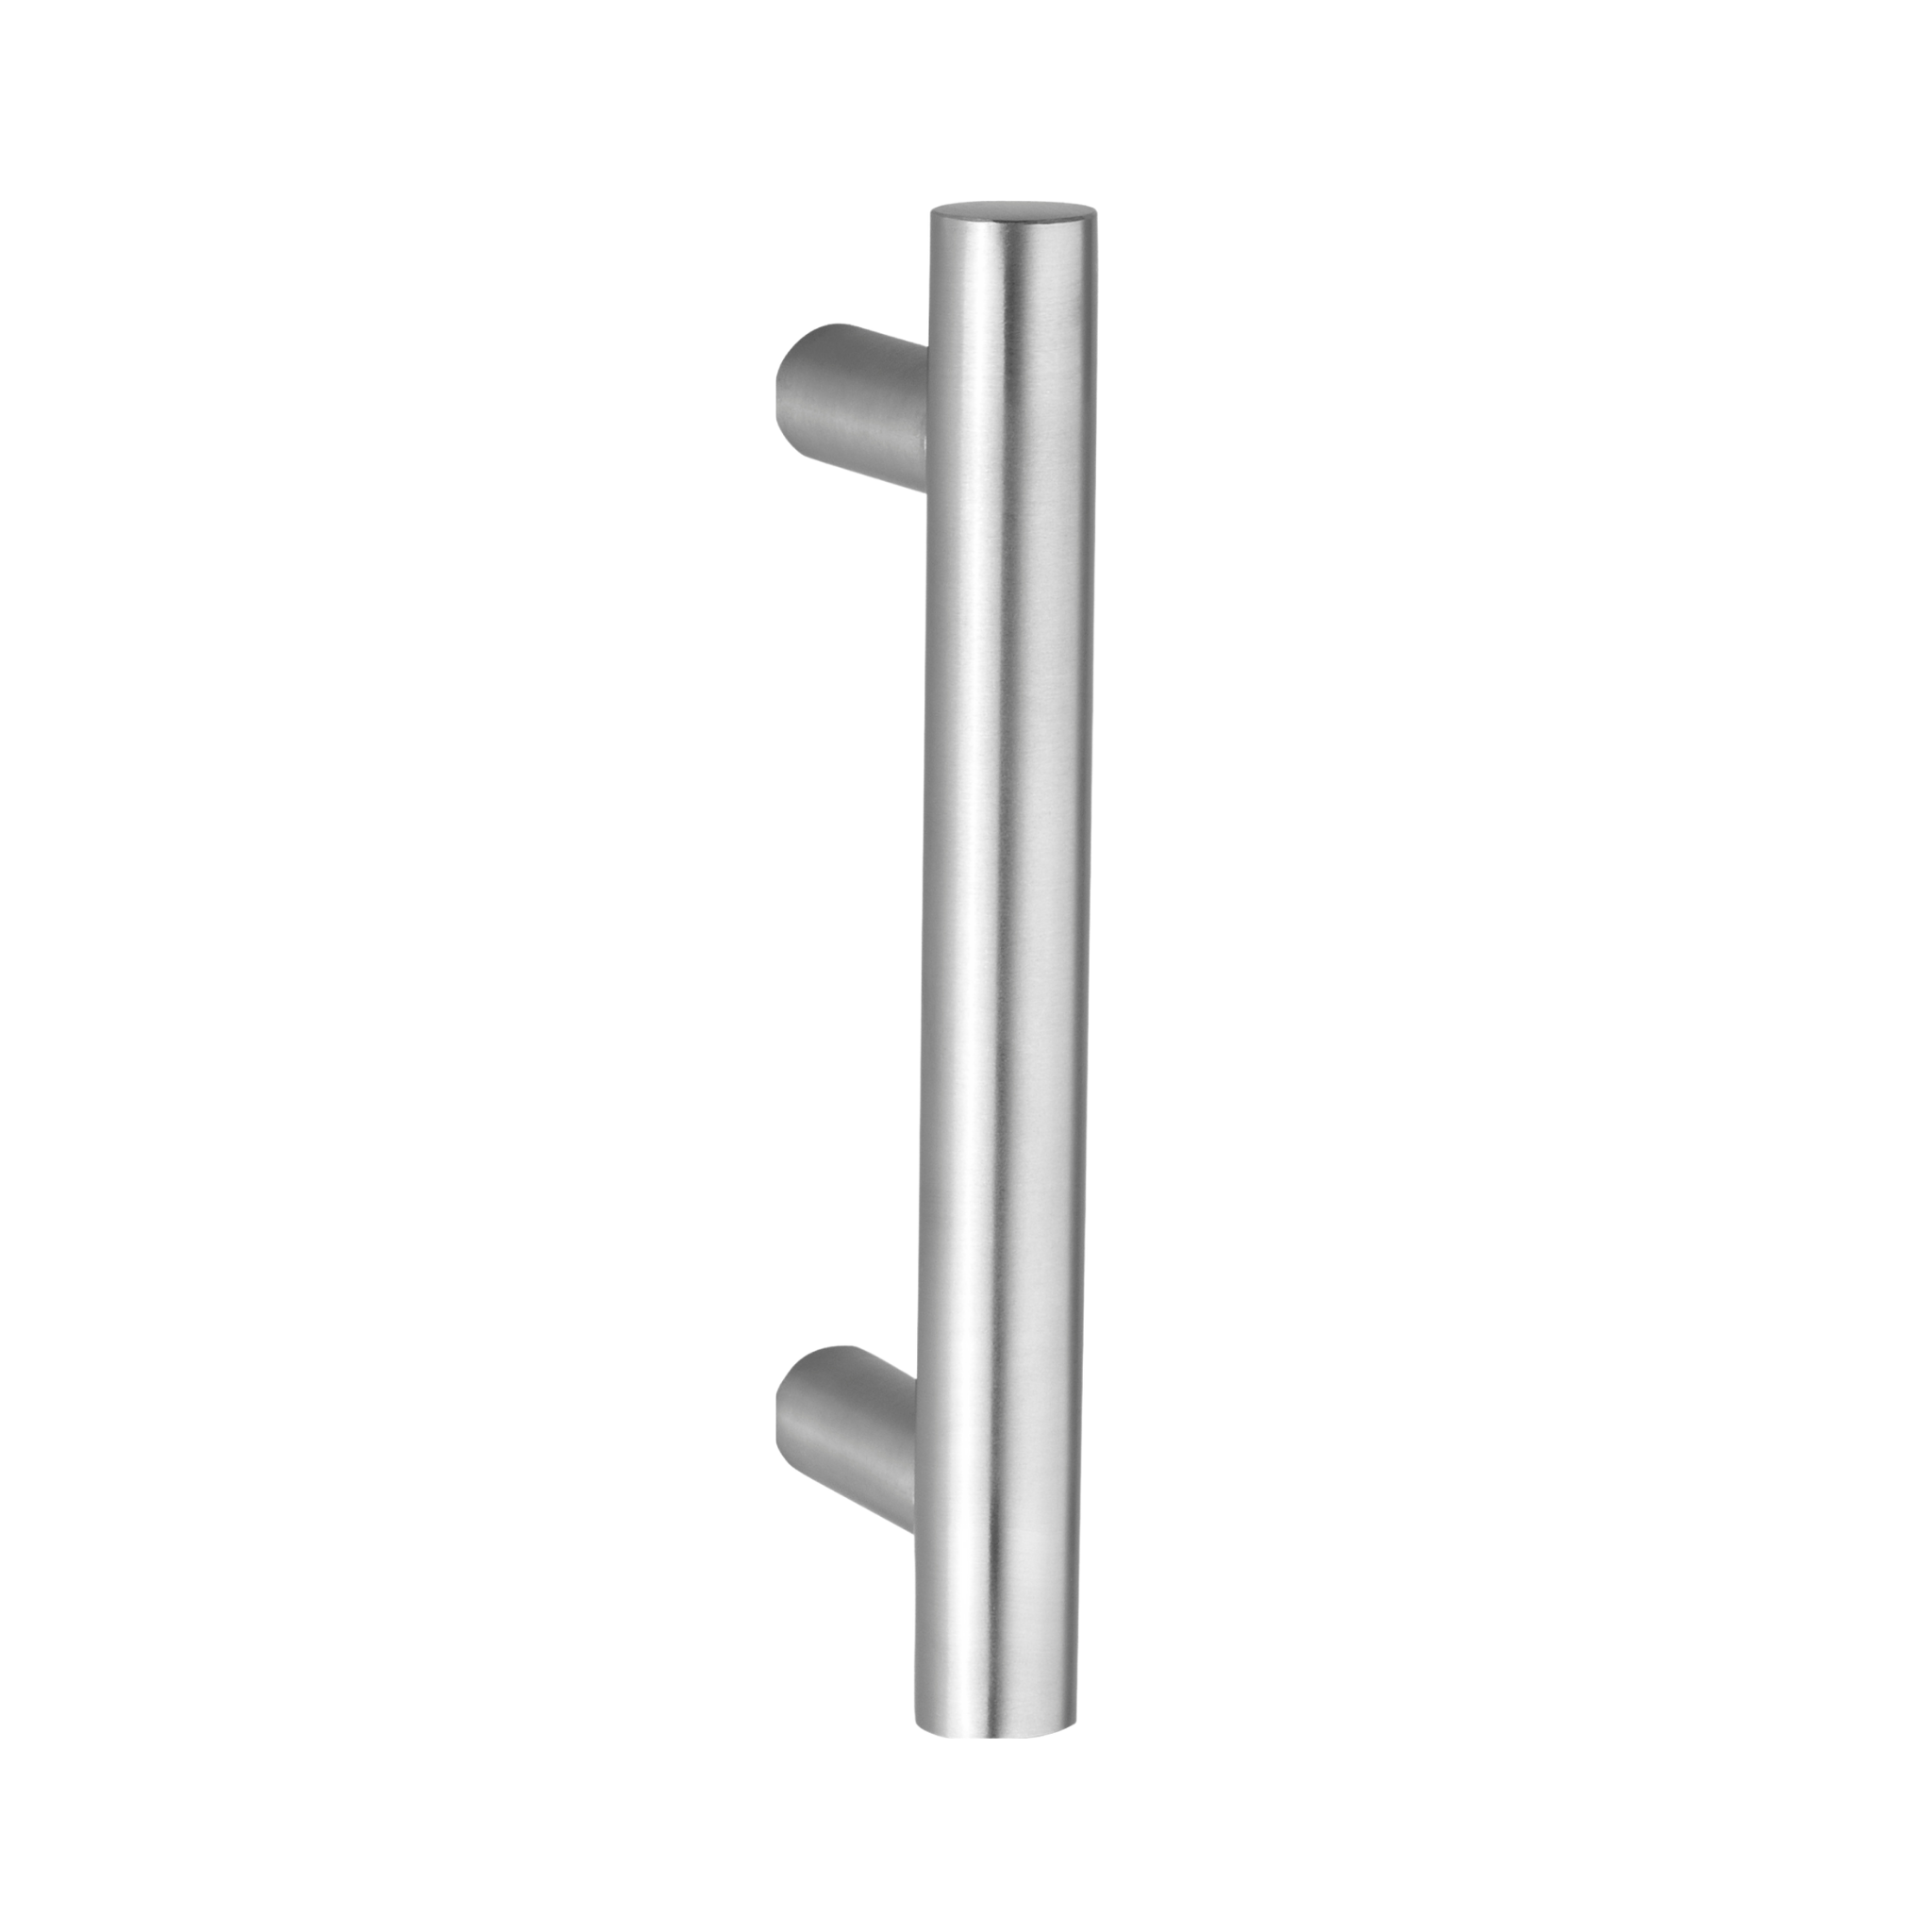 FP.T01.BB.TR, Pull Handle, Tubular, T Handle, BTB, 22mm (Ø) x 200mm (l) x 140mm (ctc), Stainless Steel with Tarnish Resistant, CISA